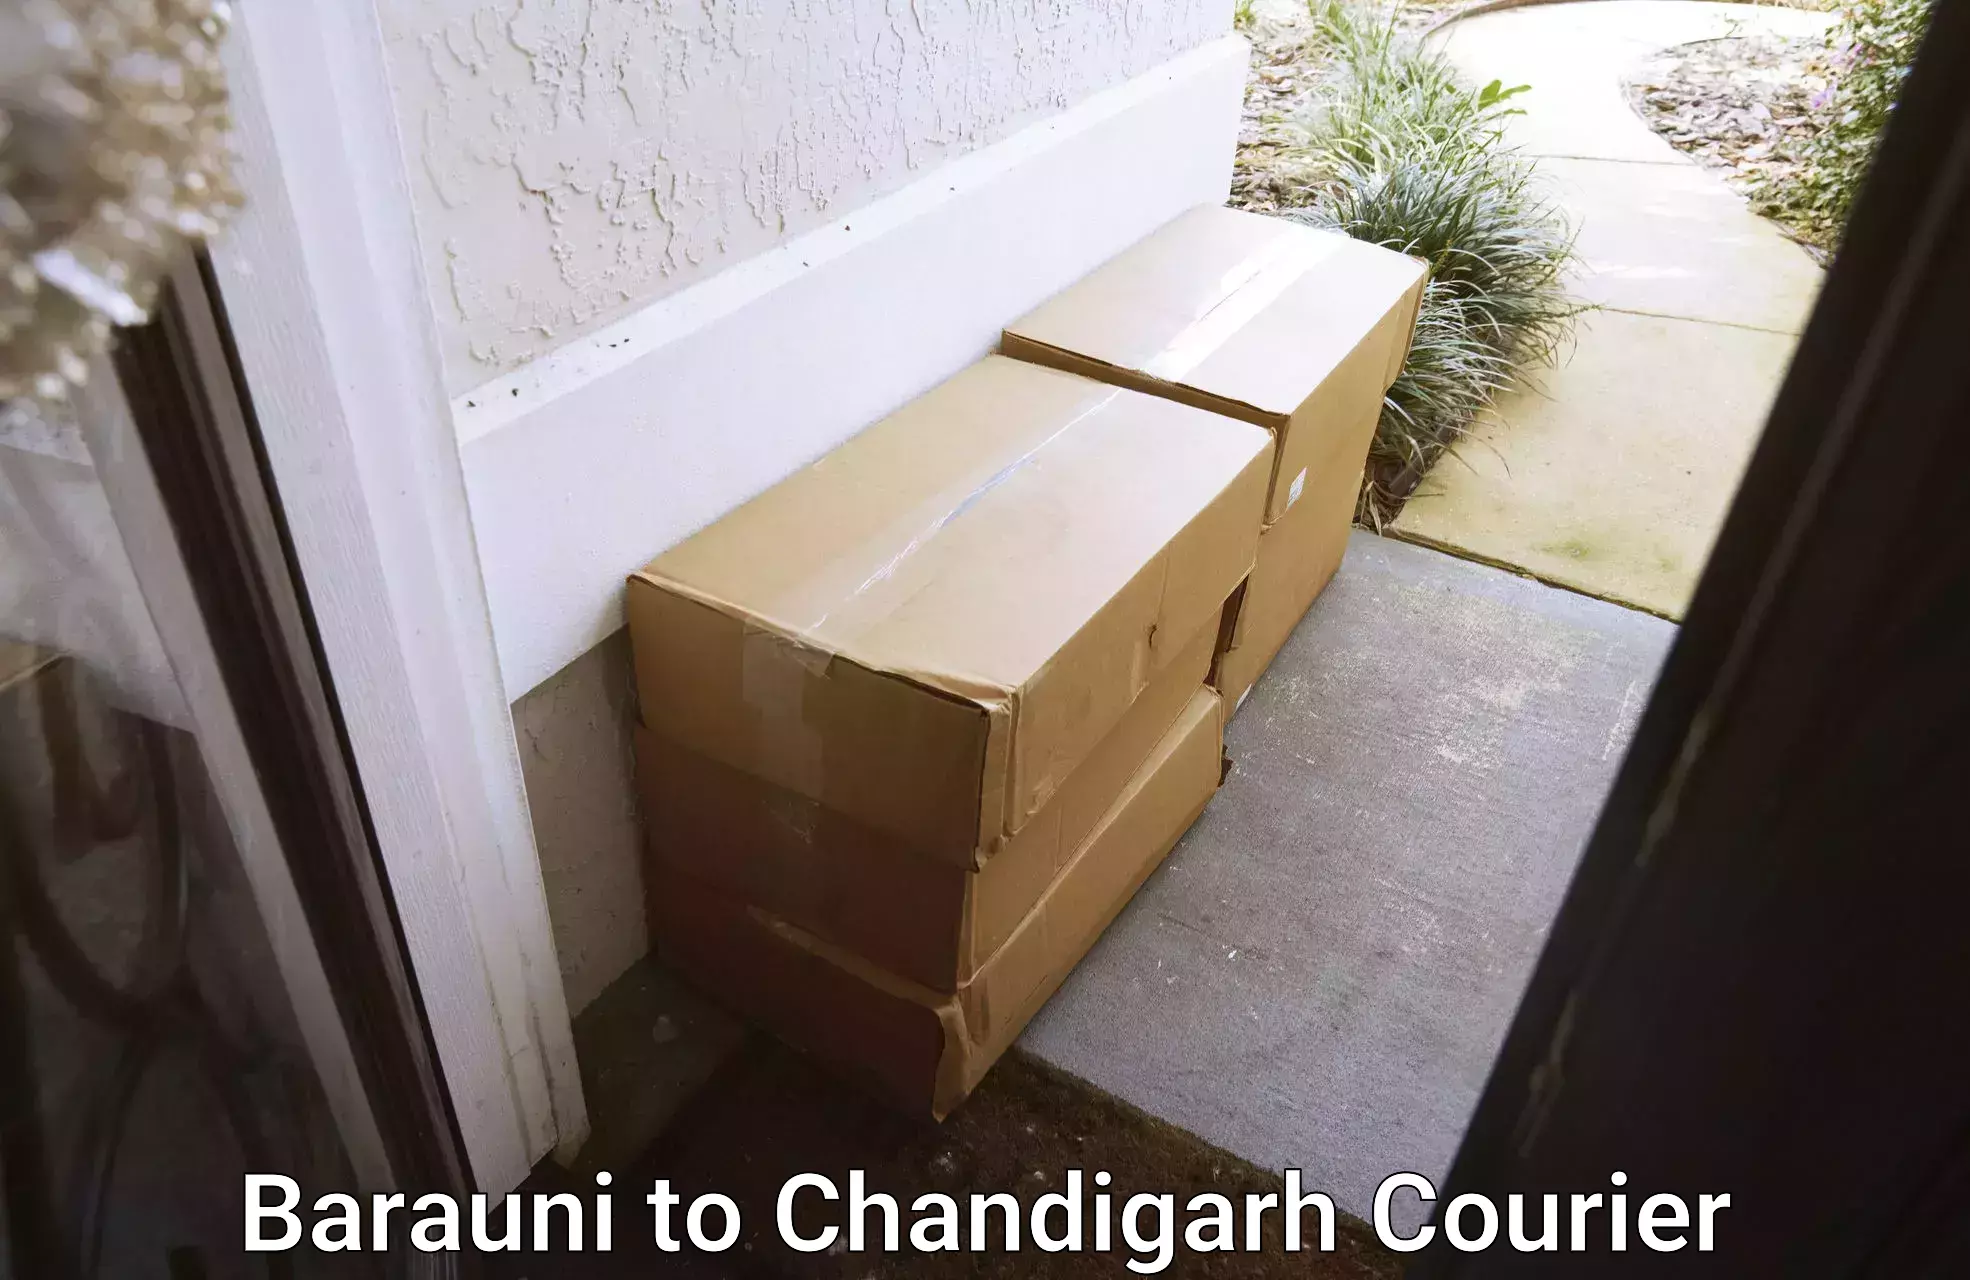 Trusted relocation experts Barauni to Chandigarh